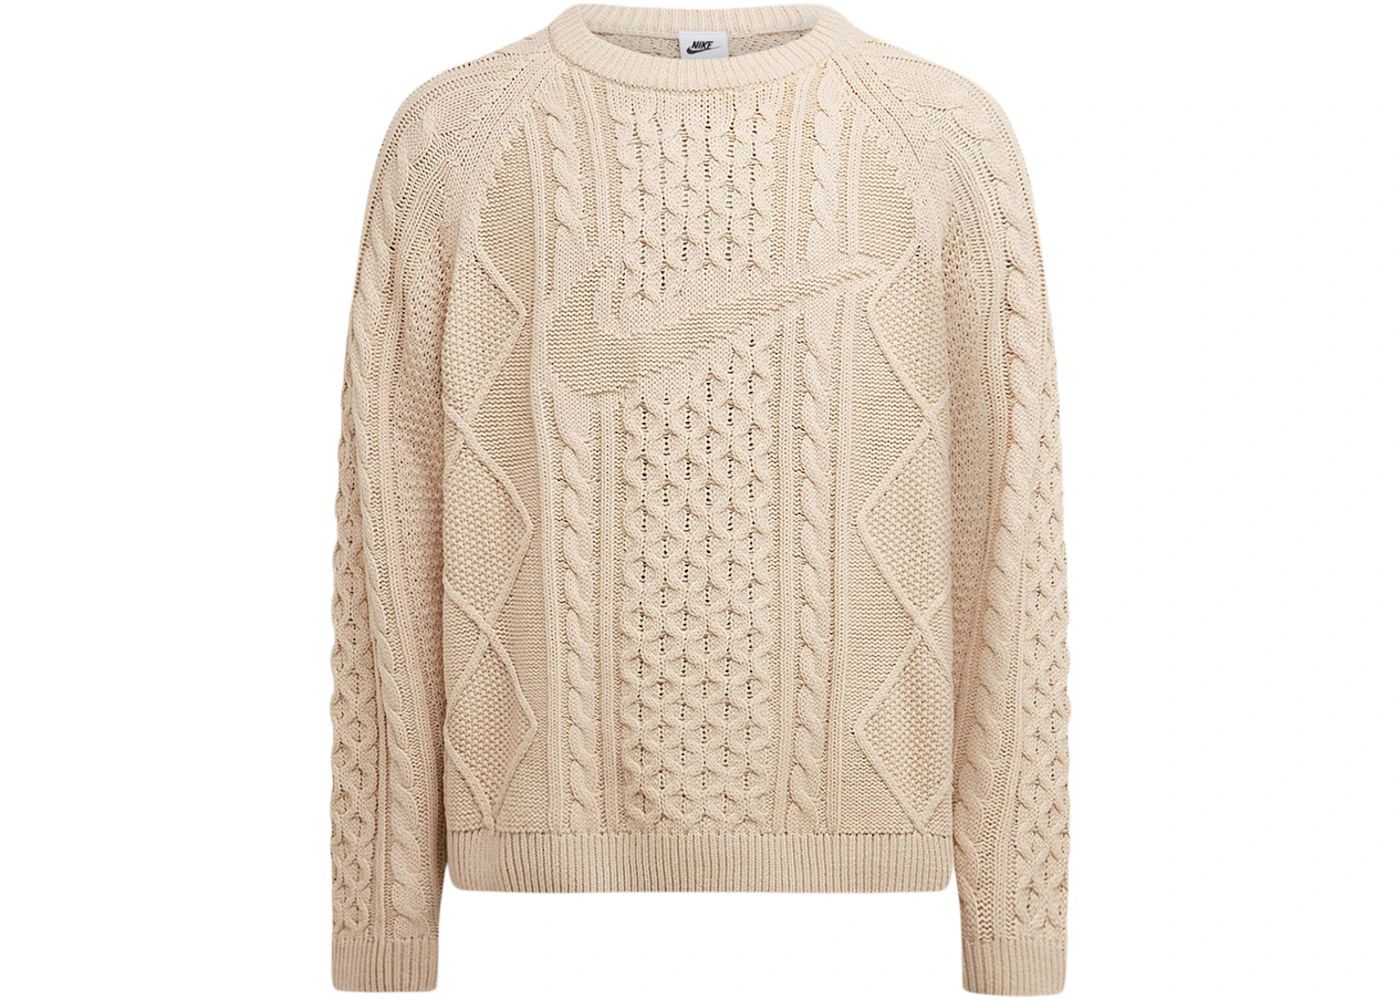 Nike Life Cable Knit SweaterRattan | StockX